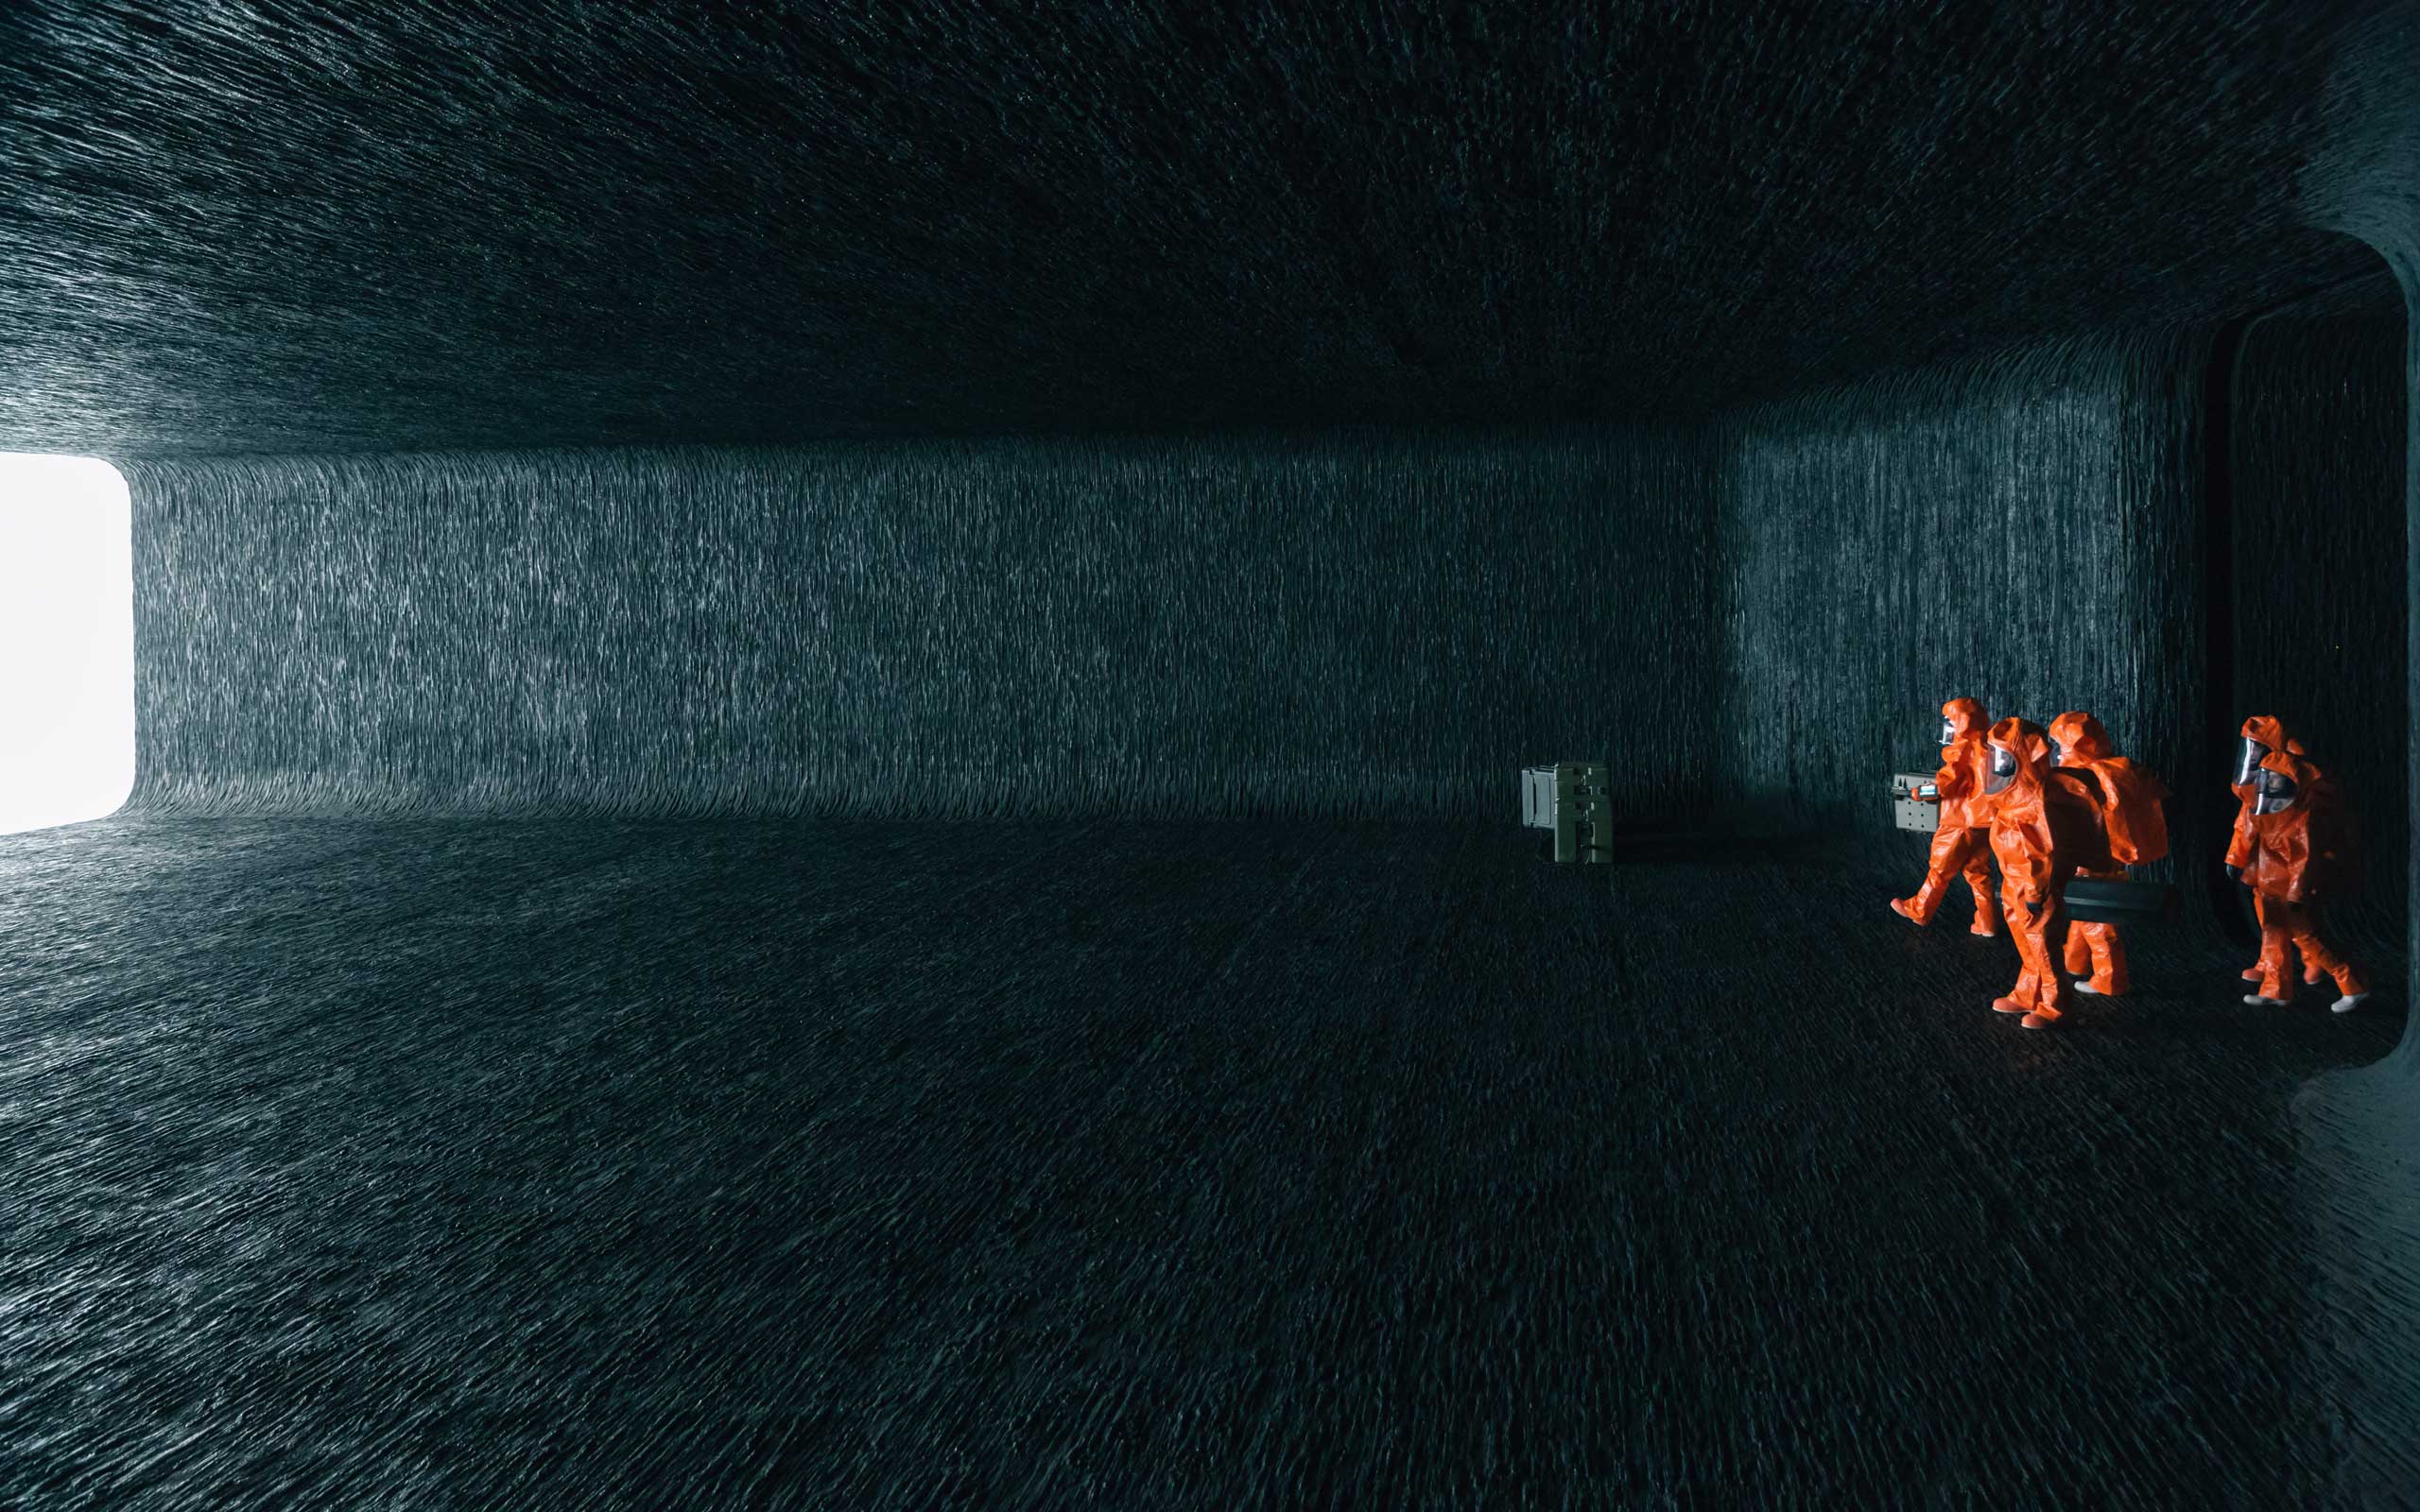 A scene inside the spaceship's chamber from the film "Arrival" by Paramount Pictures (Jan Thijs)